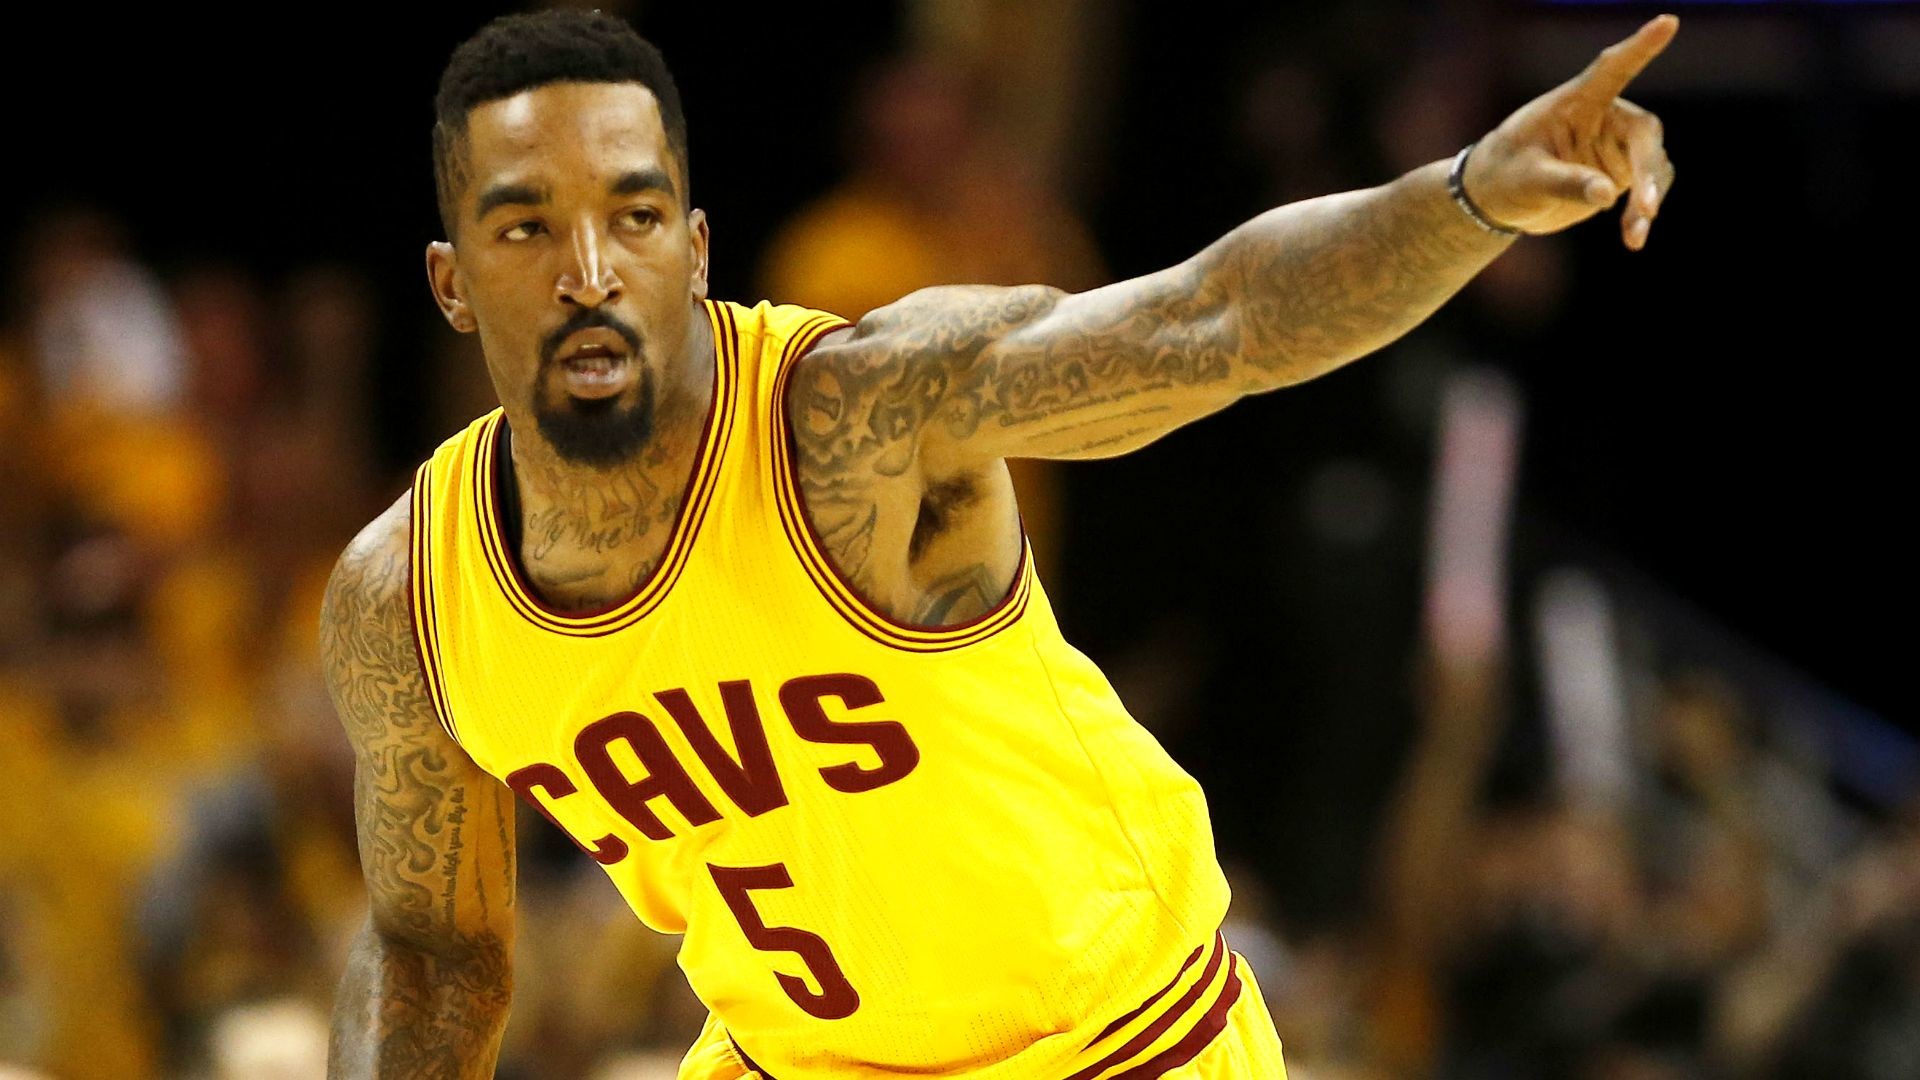 1920x1080 Cavaliers' J.R. Smith (thumb) to have surgery, out 4-6 weeks, report says